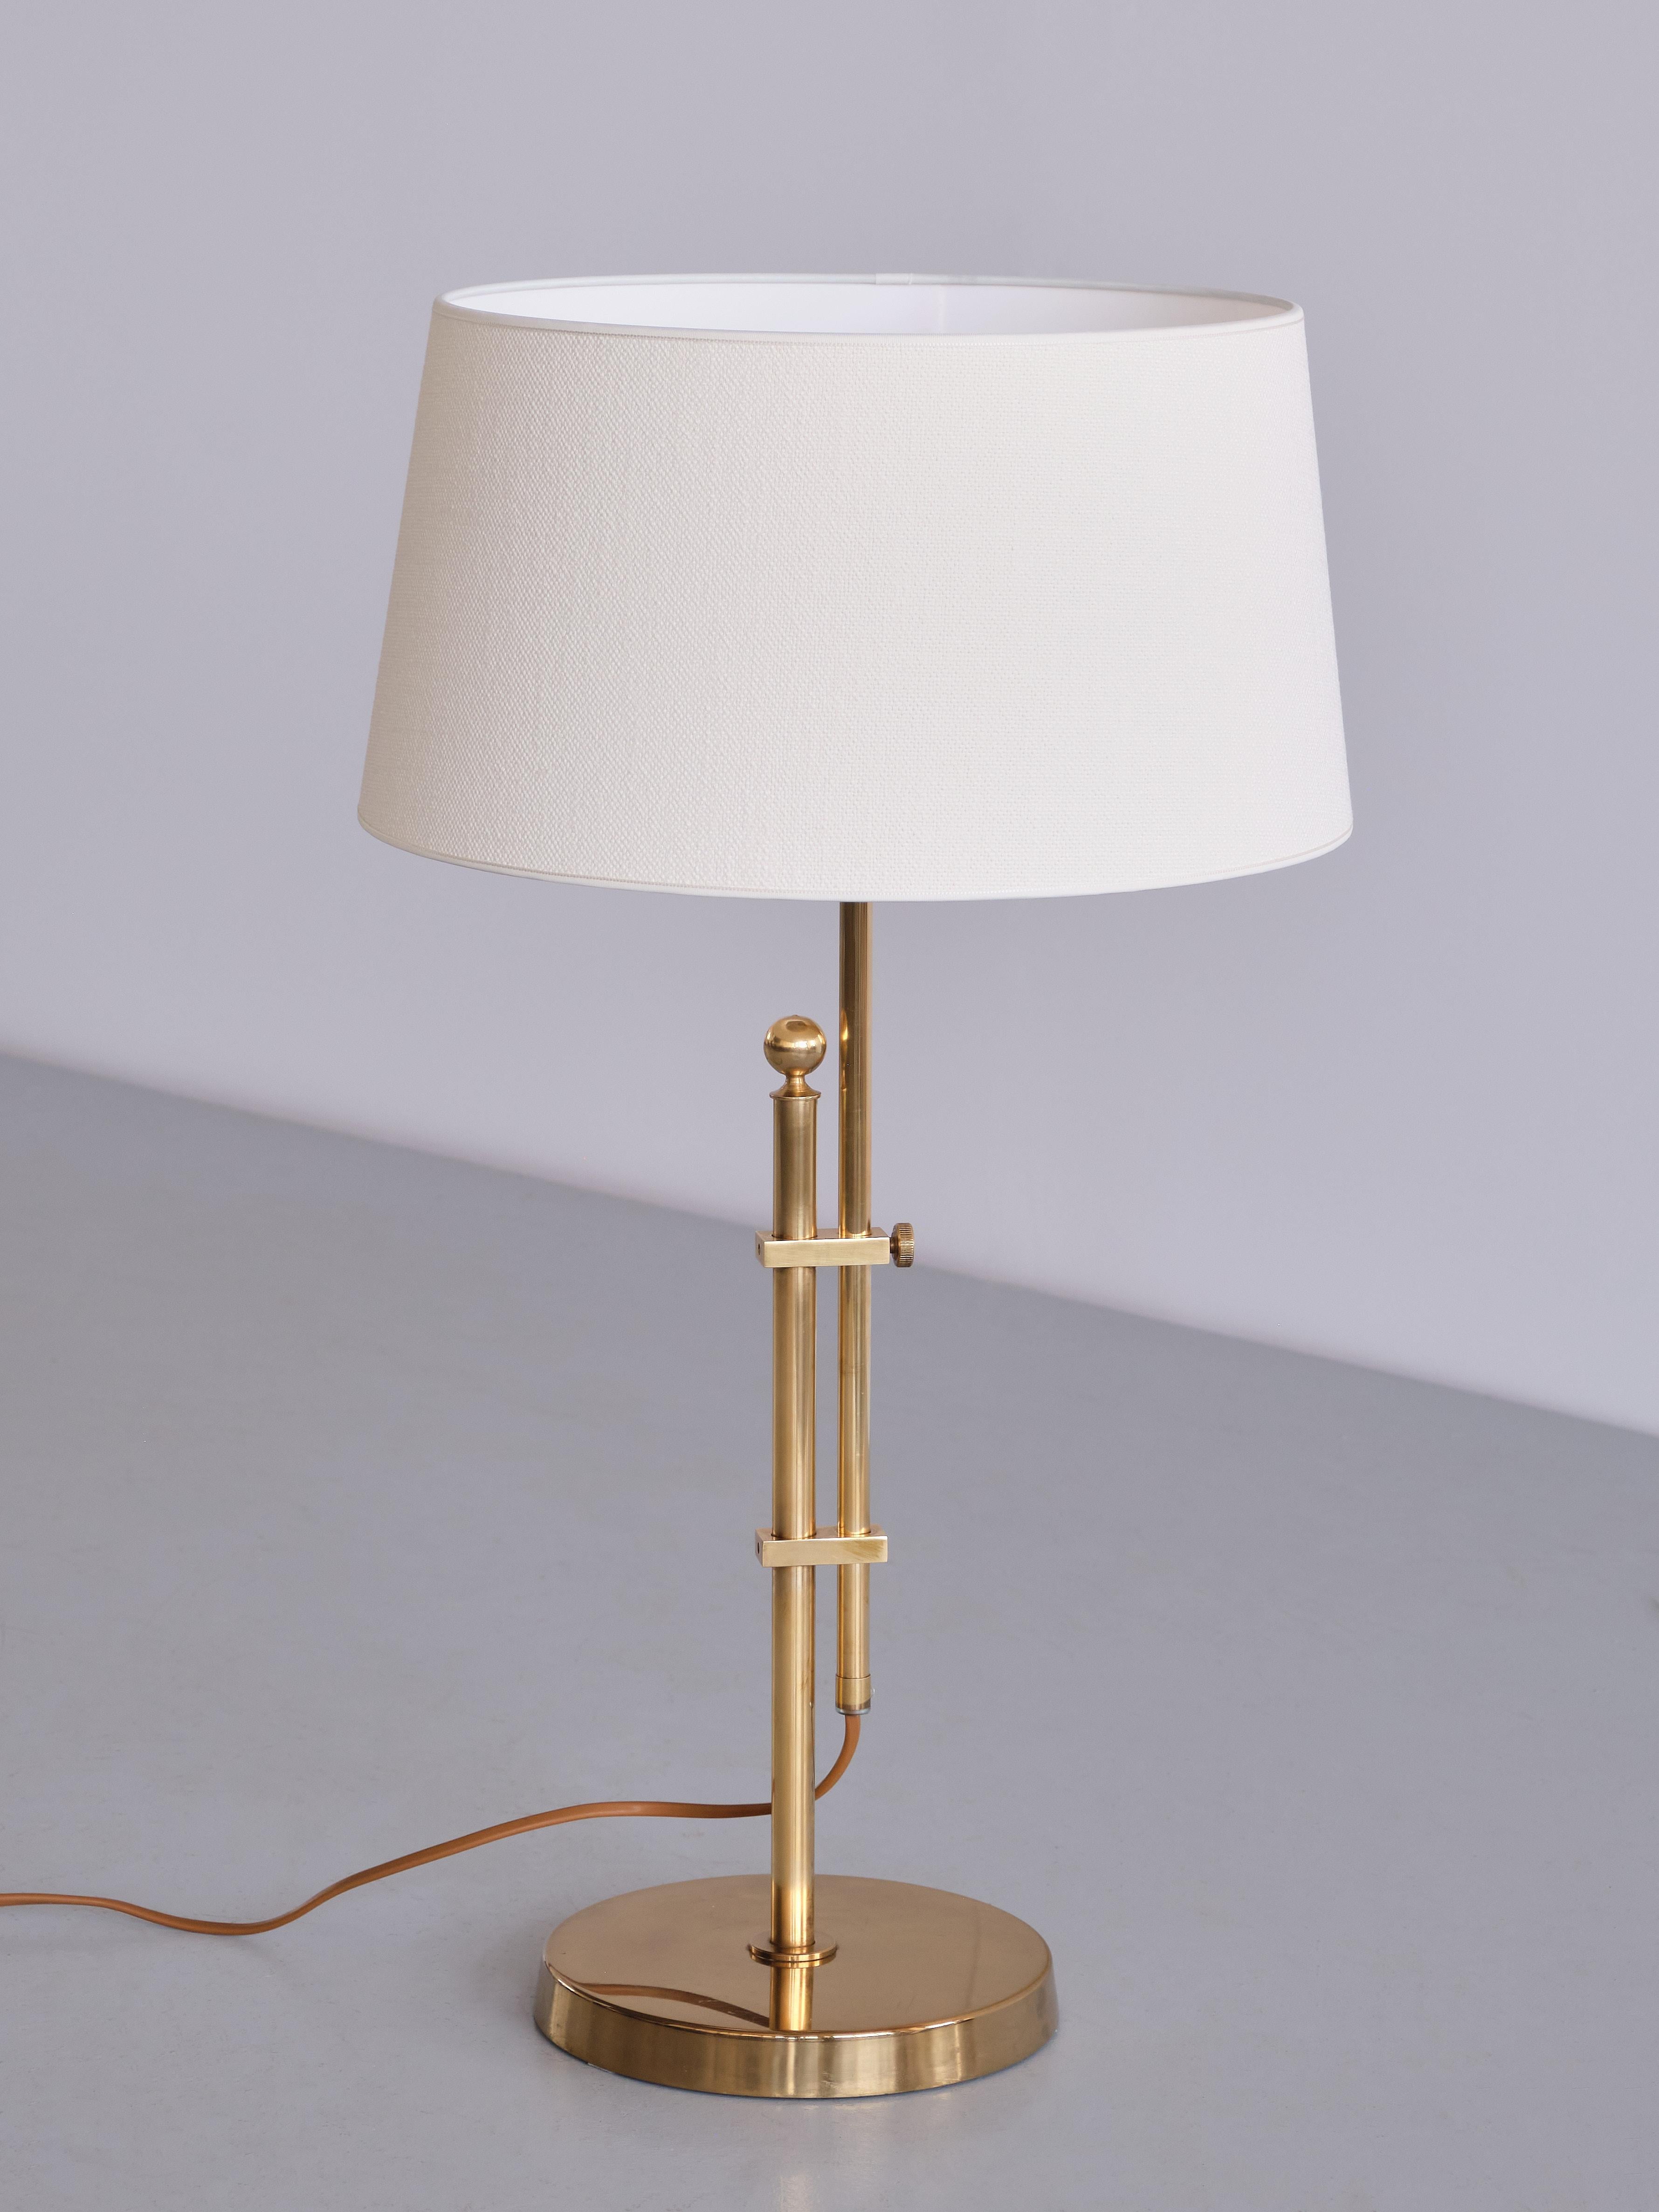 Bergboms B-131 Height Adjustable Table Lamp in Brass, Sweden, 1950s For Sale 3